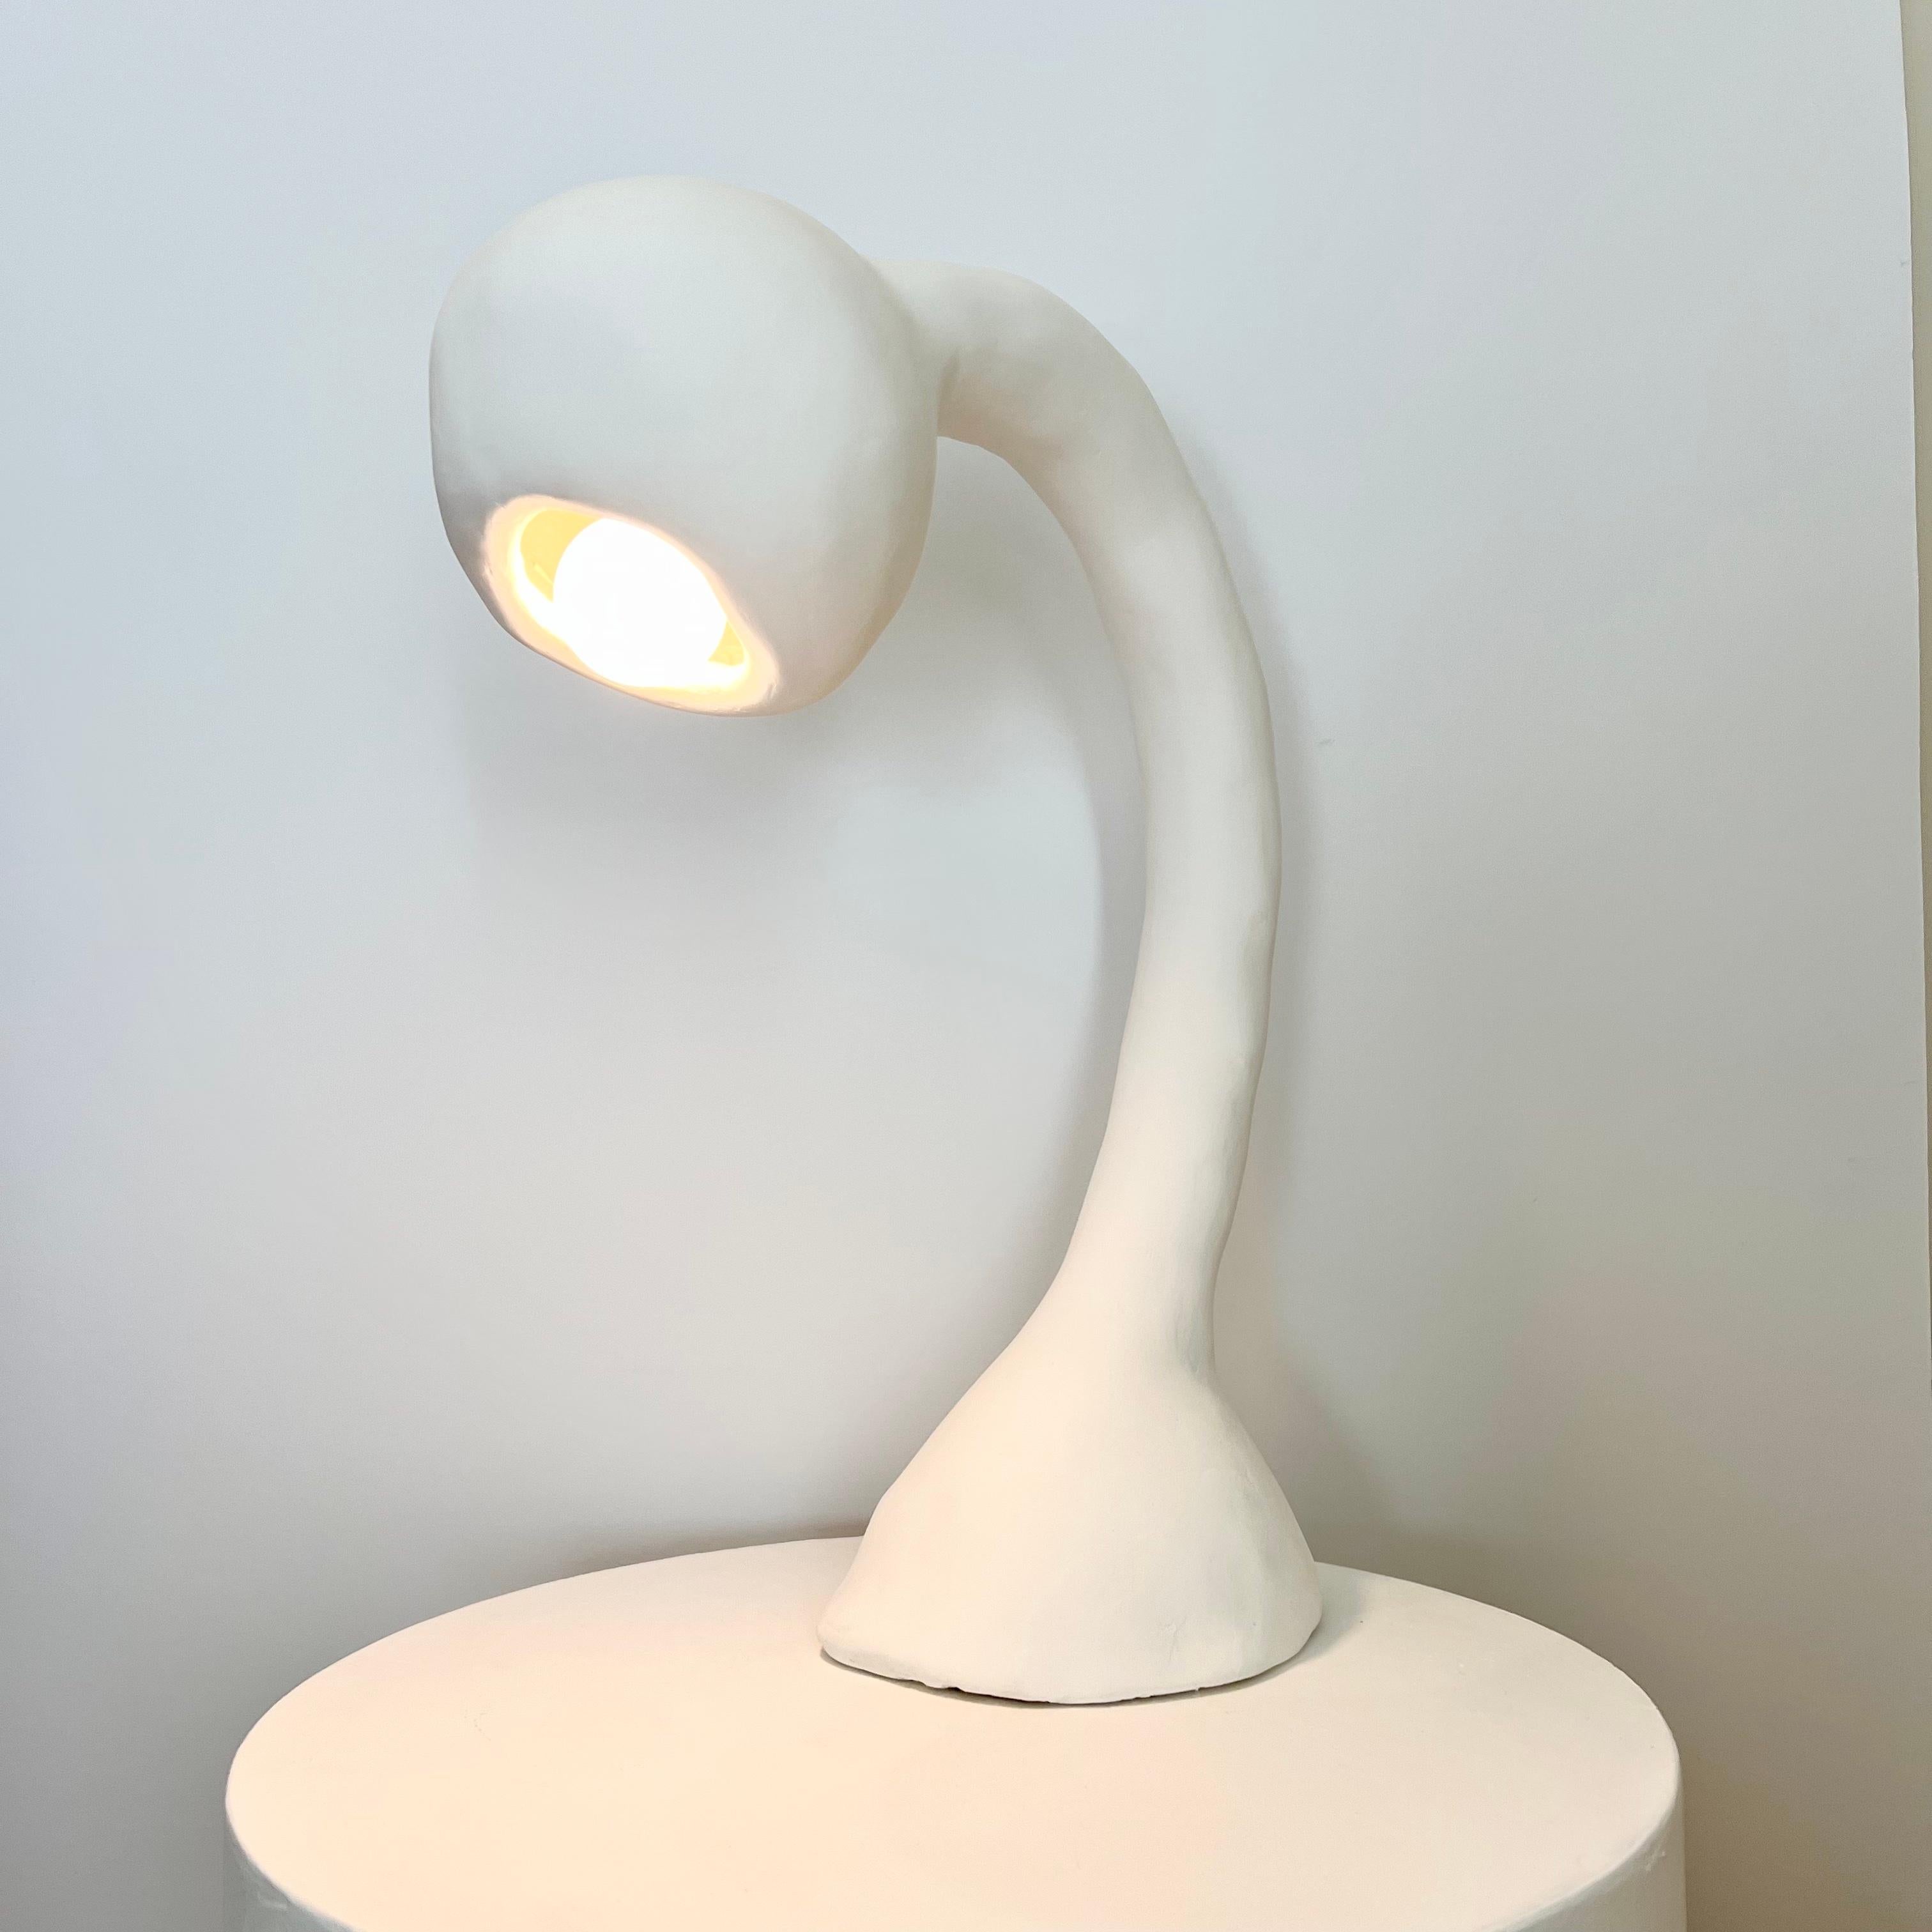 Organic Modern Biomorphic Line by Studio Chora, Table Lamp, White Lime Plaster, Made-To-Order